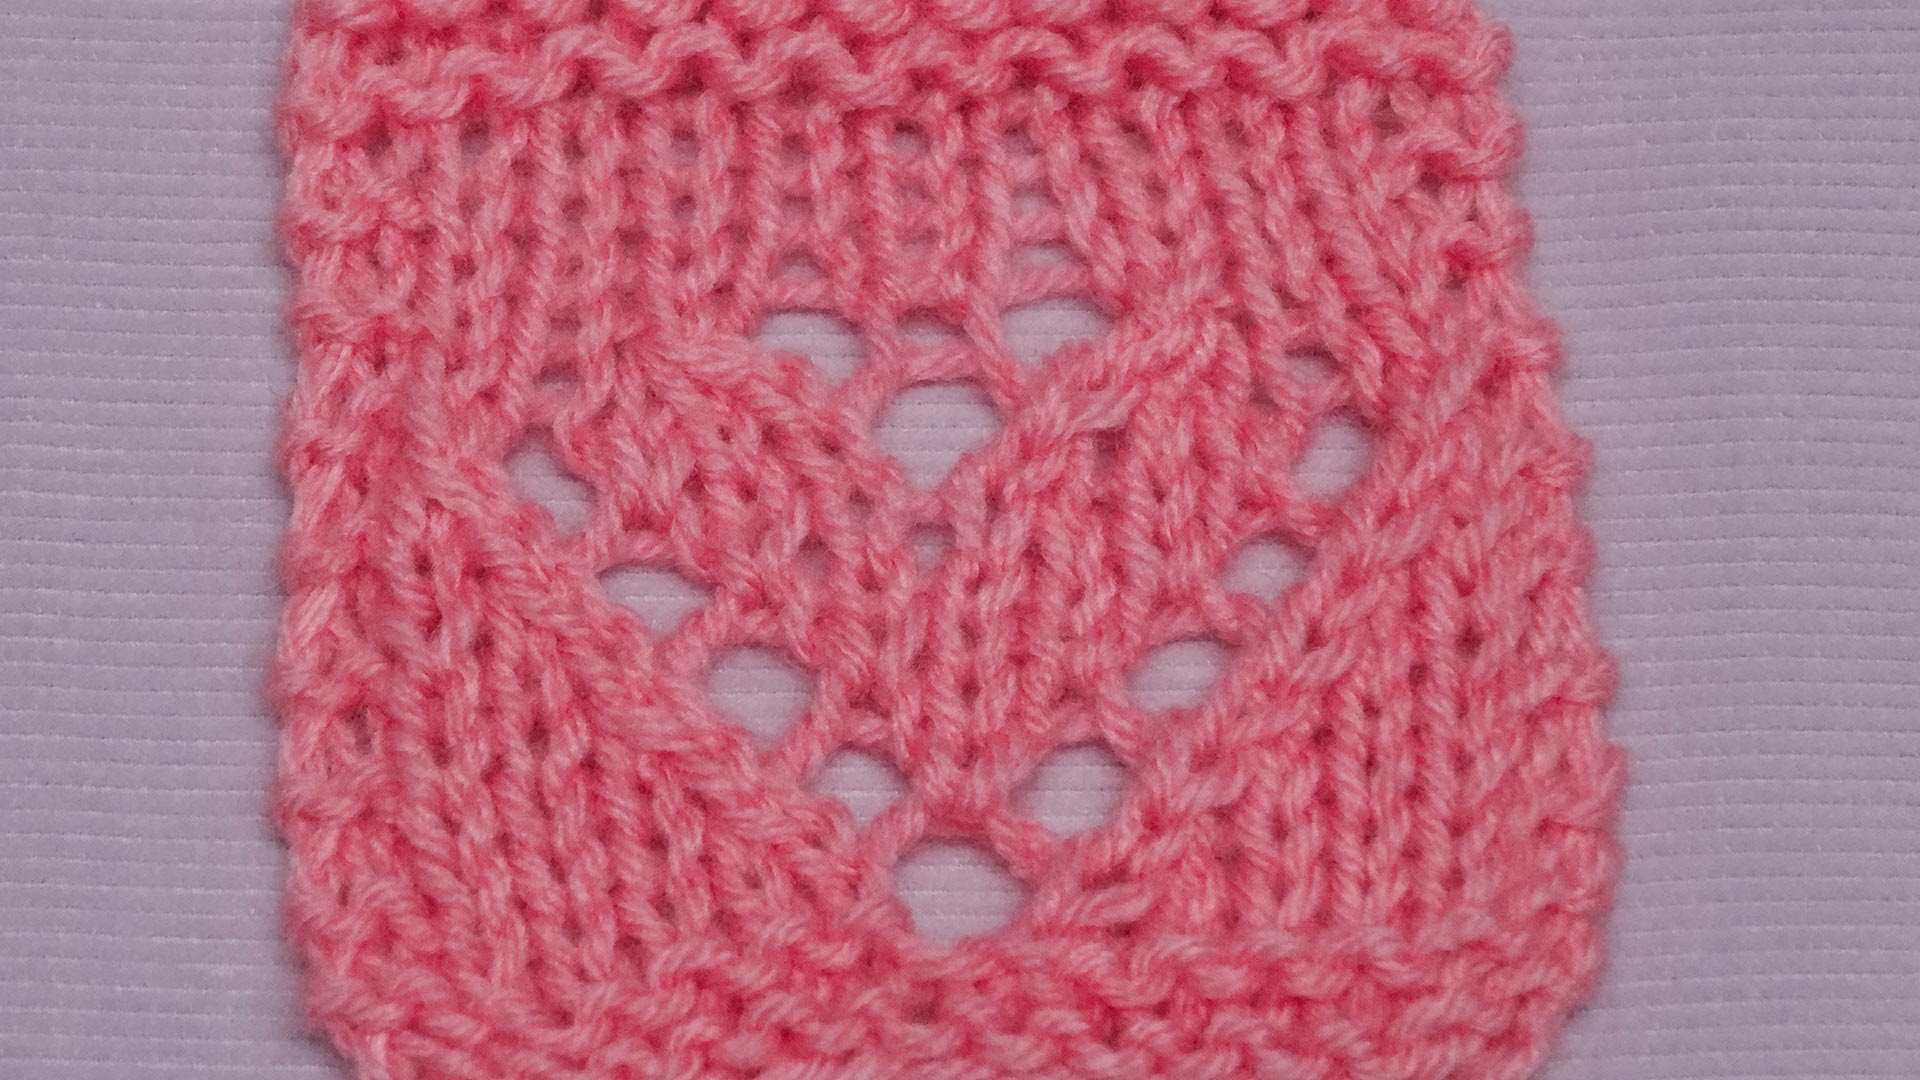 Lace-Herz - Lace-Heart - Strickmuster - Knitting Pattern